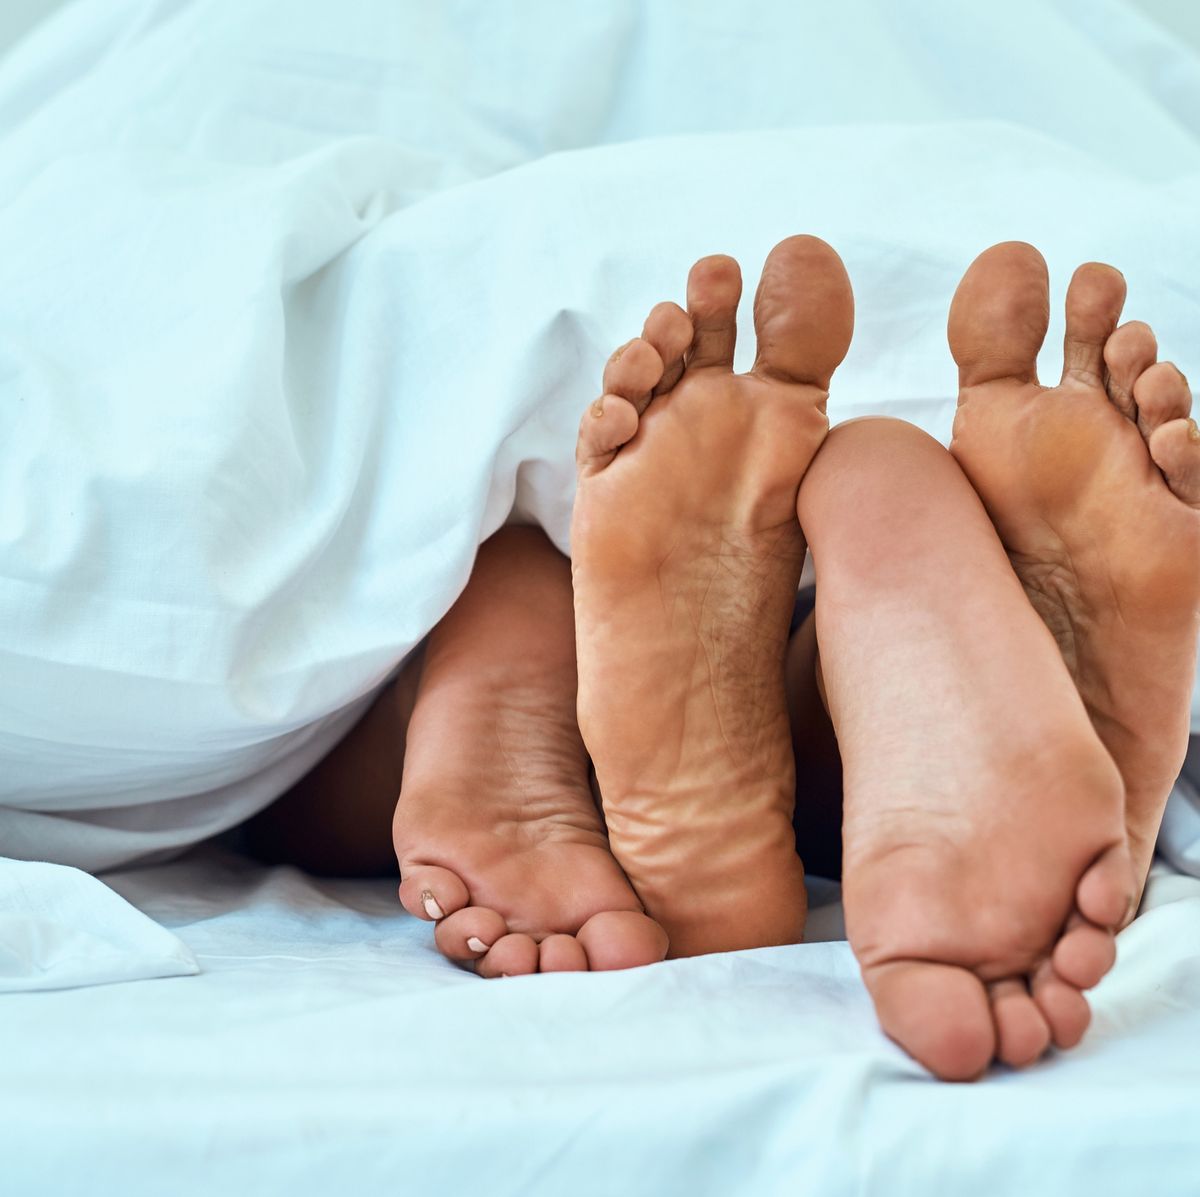 Sleeping Mom And Son Sexi Moves - What Is Toe Sucking? Definition And Best Tips From Sex Experts